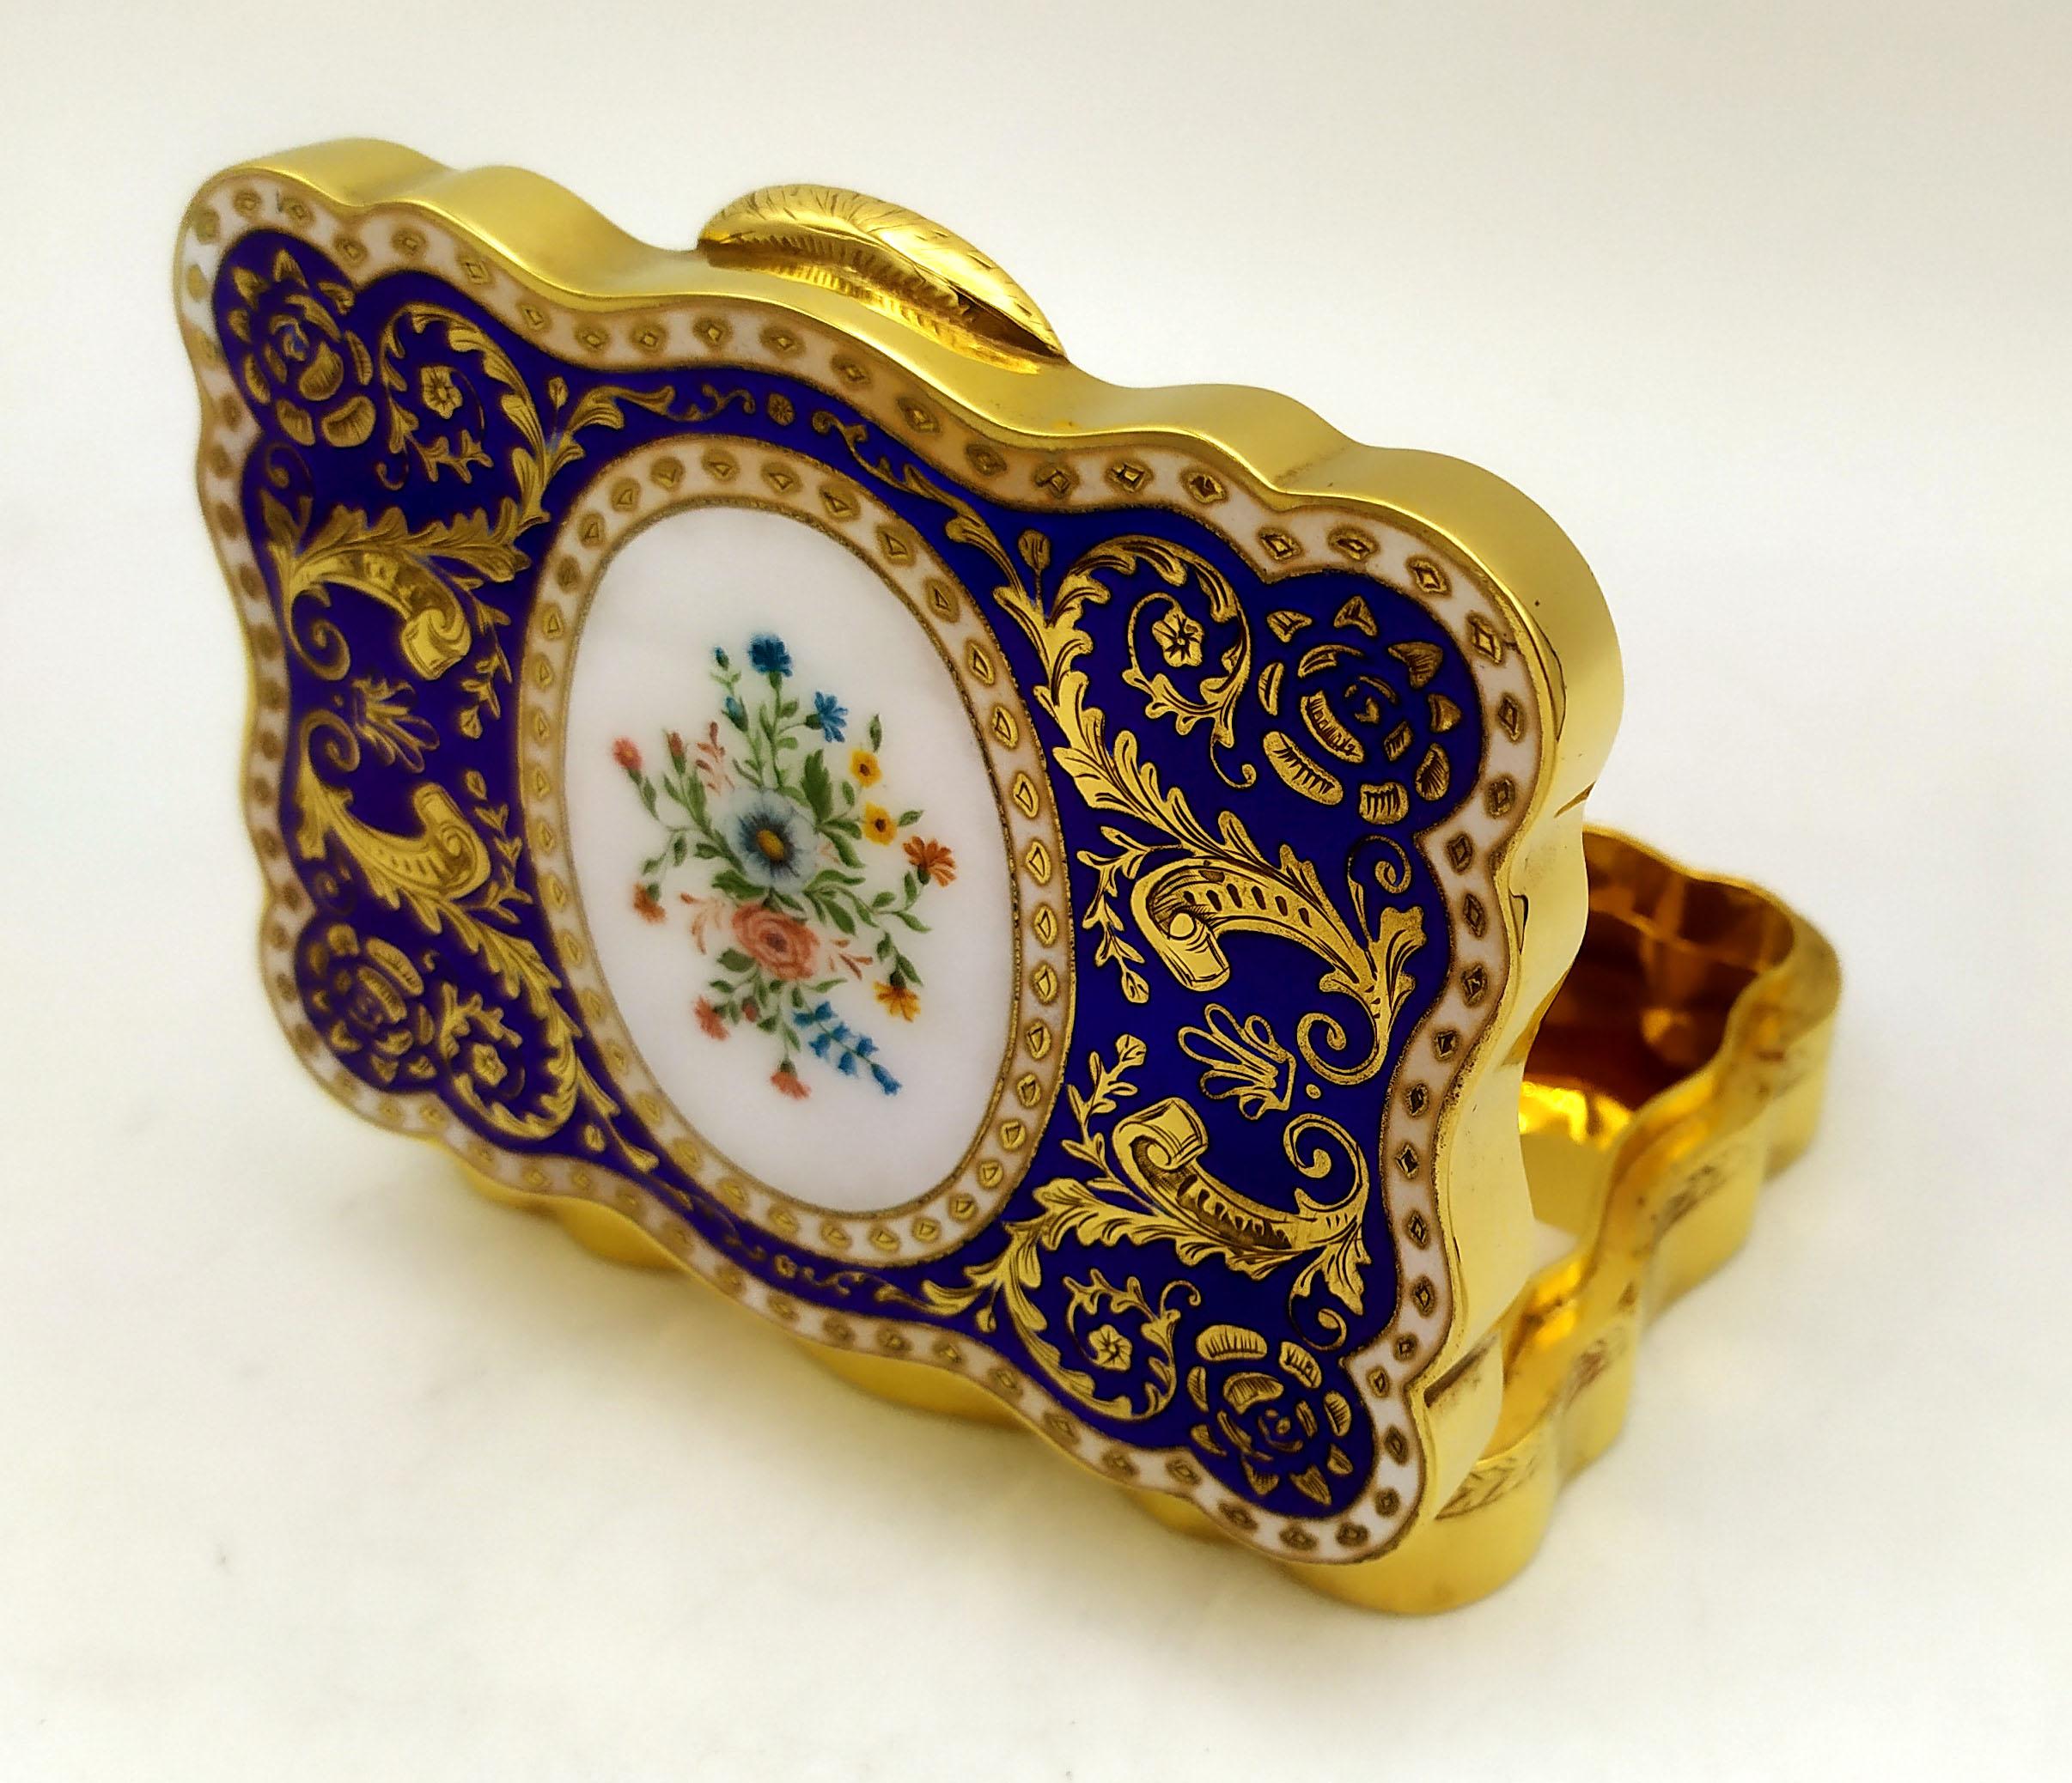 Shaped table box in 925/1000 sterling silver gold plated with fine fire-enameled engraving on the lid and hand-painted floral miniature in 18th century French Empire style. Dimensions cm. 7.8 x 10.5 x 2.5. Weight g. 347. Designed by Franco Salimbeni